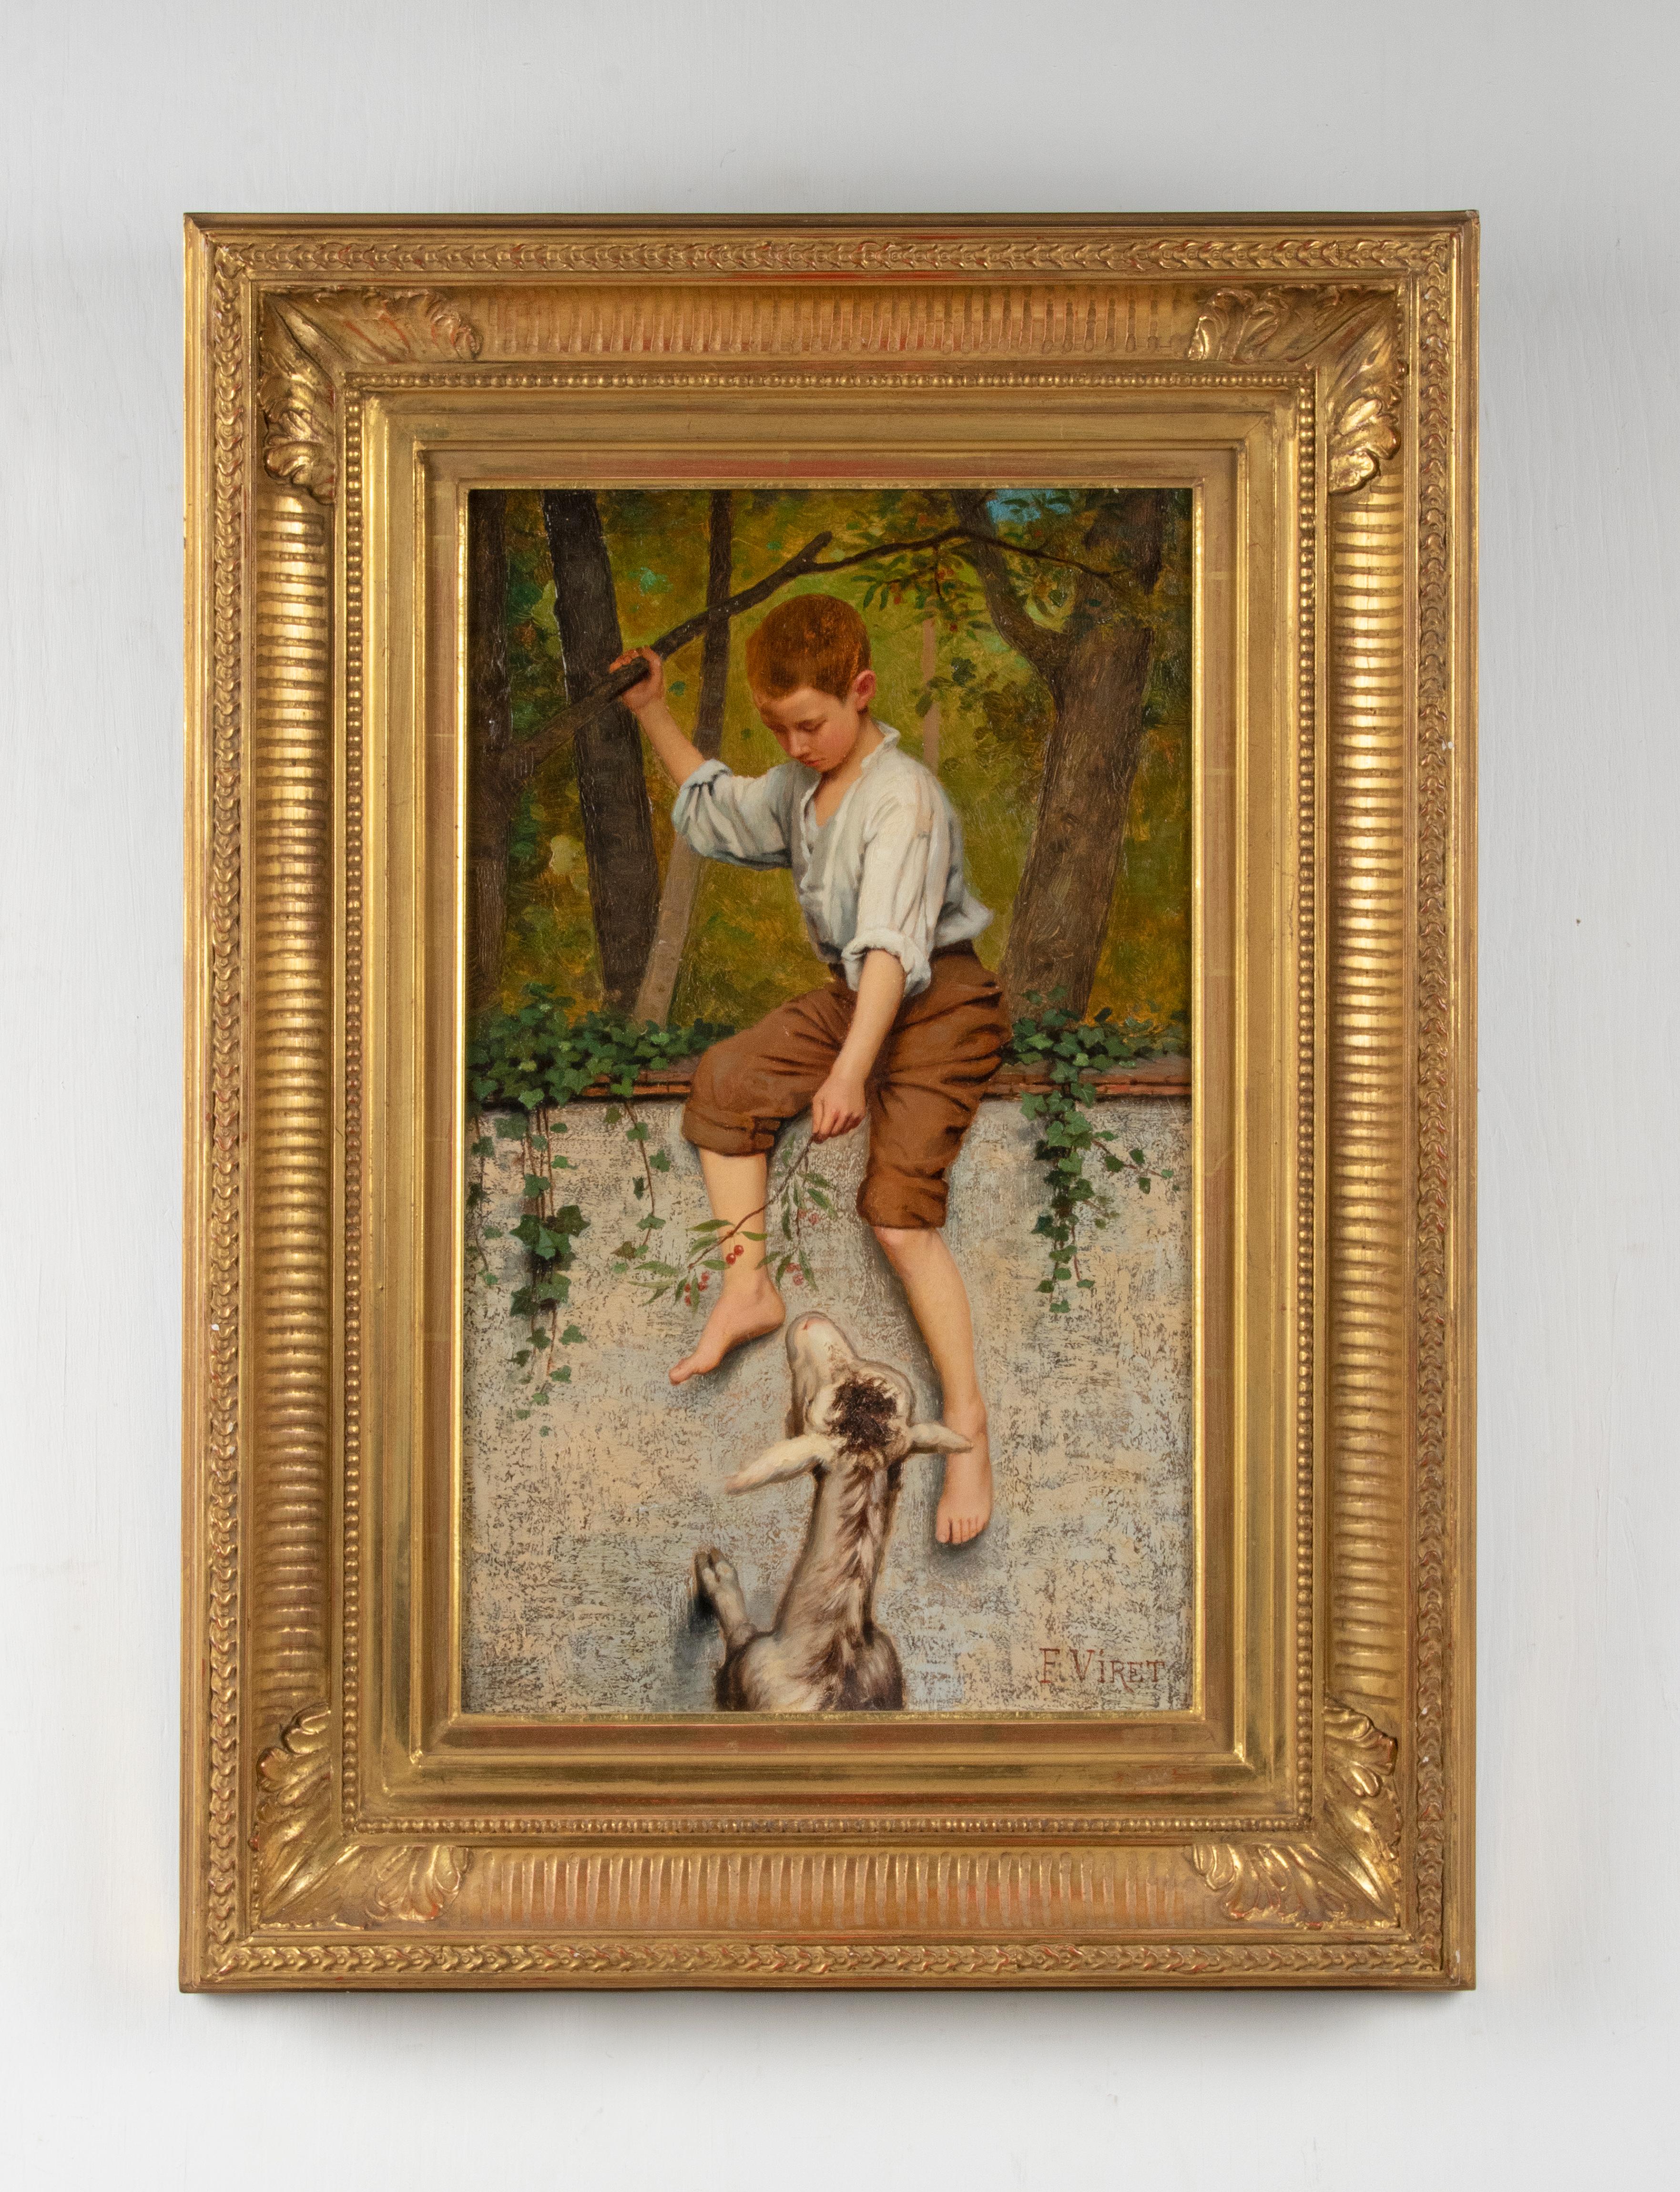 A fine oil painting depicting a boy feeding a goat with berries. it's painted on a wooden panel. Signed right under: Frédéric Viret. In an elegant gold leaf frame. The paint and the frame are in good condition. Made in France, circa